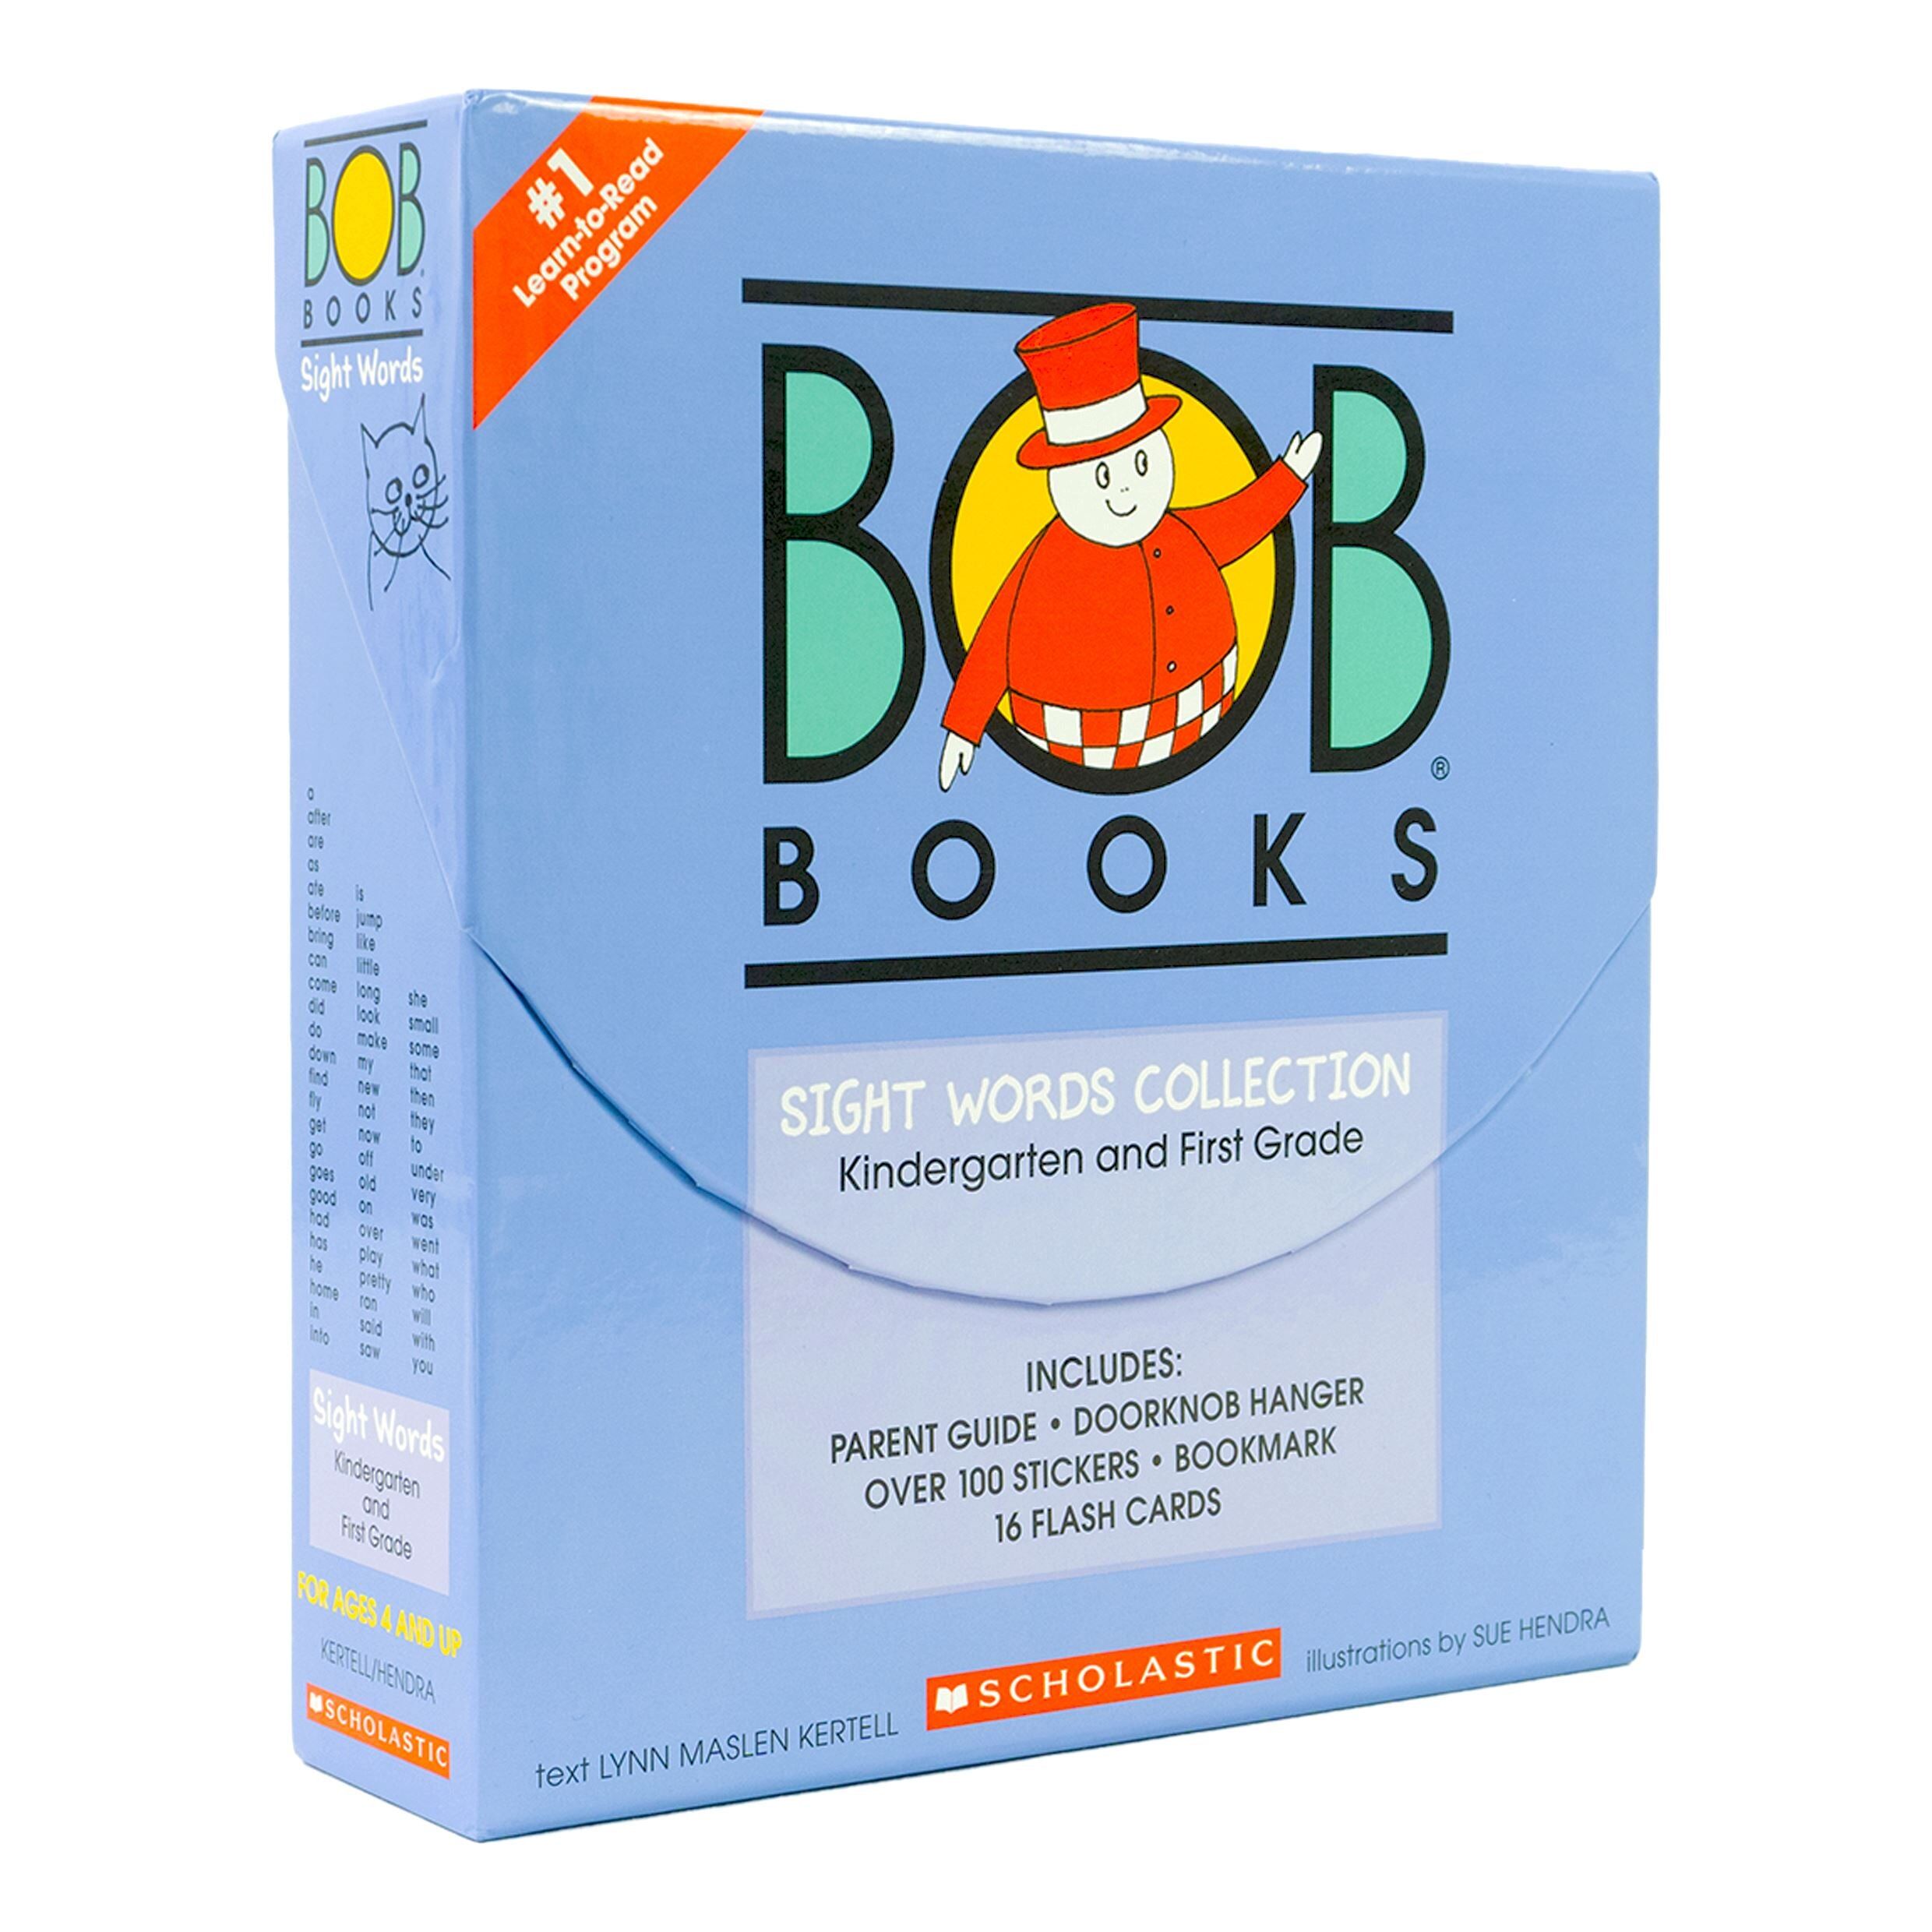 Bob Books Sight Words Collection Box Set - Kindergarten and First Grade - Ages 4+ - Paperback Scholastic